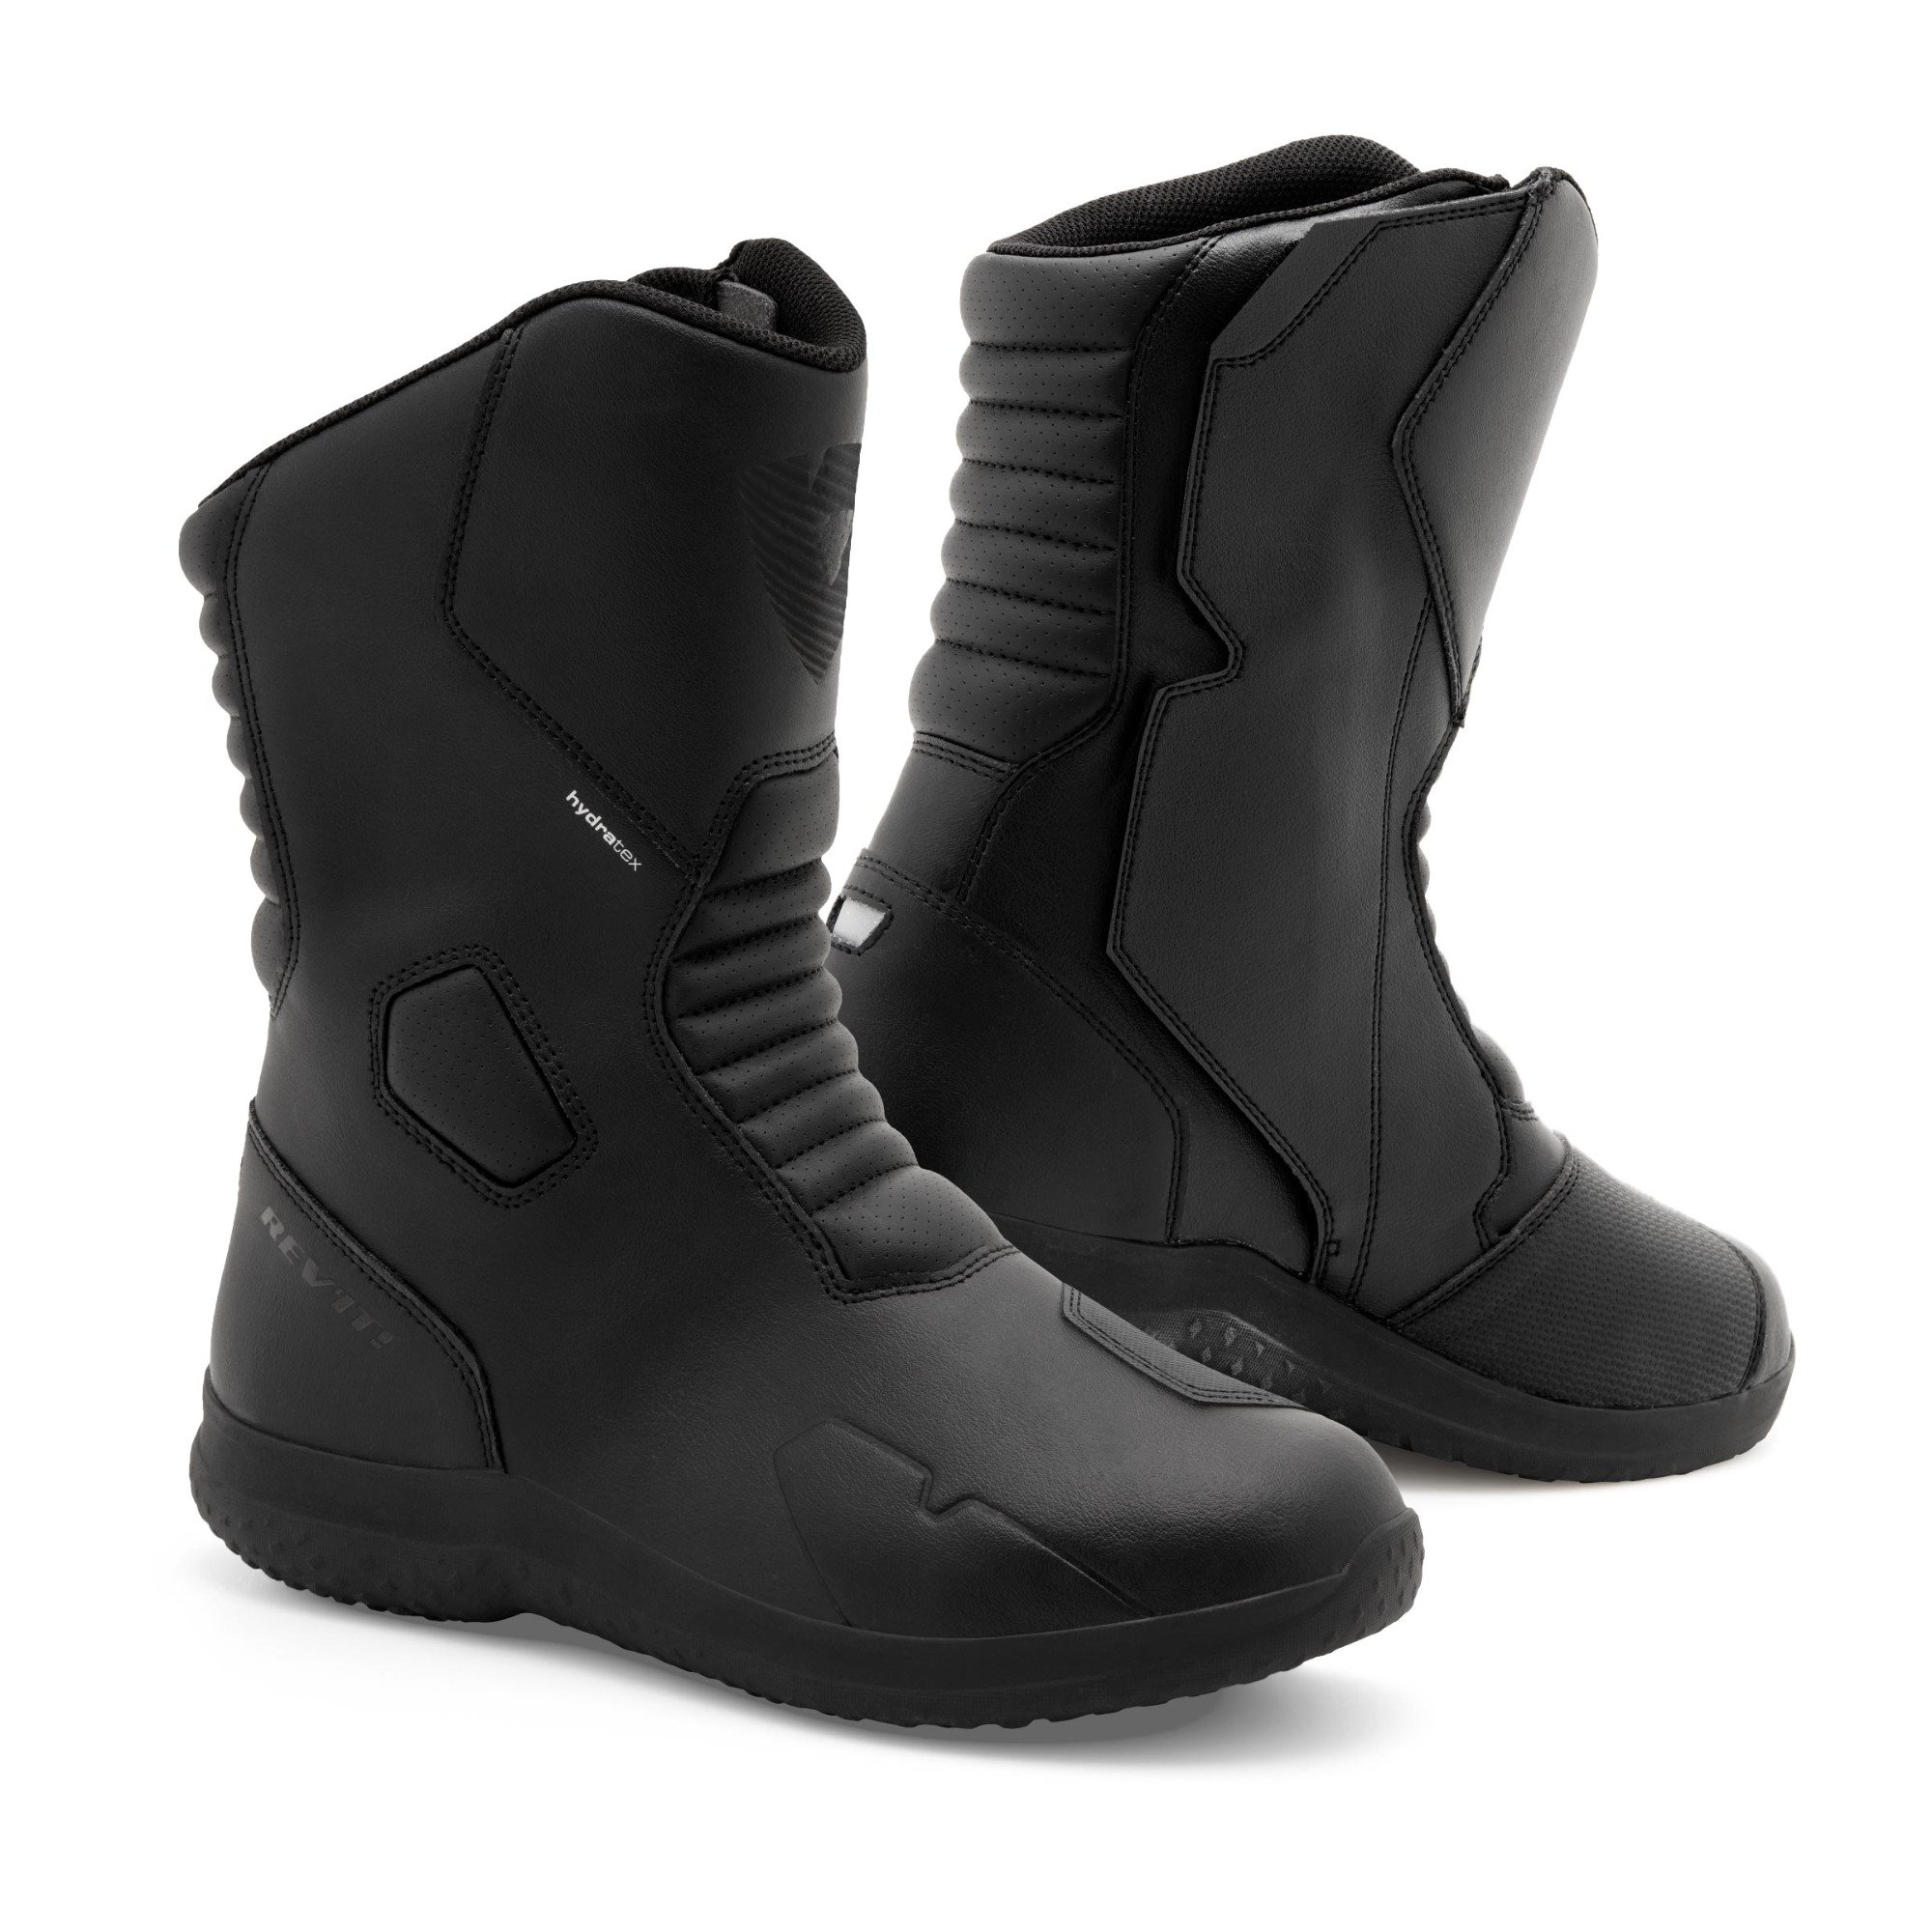 Image of REV'IT! Boots Flux H2O Black Size 41 ID 8700001330503